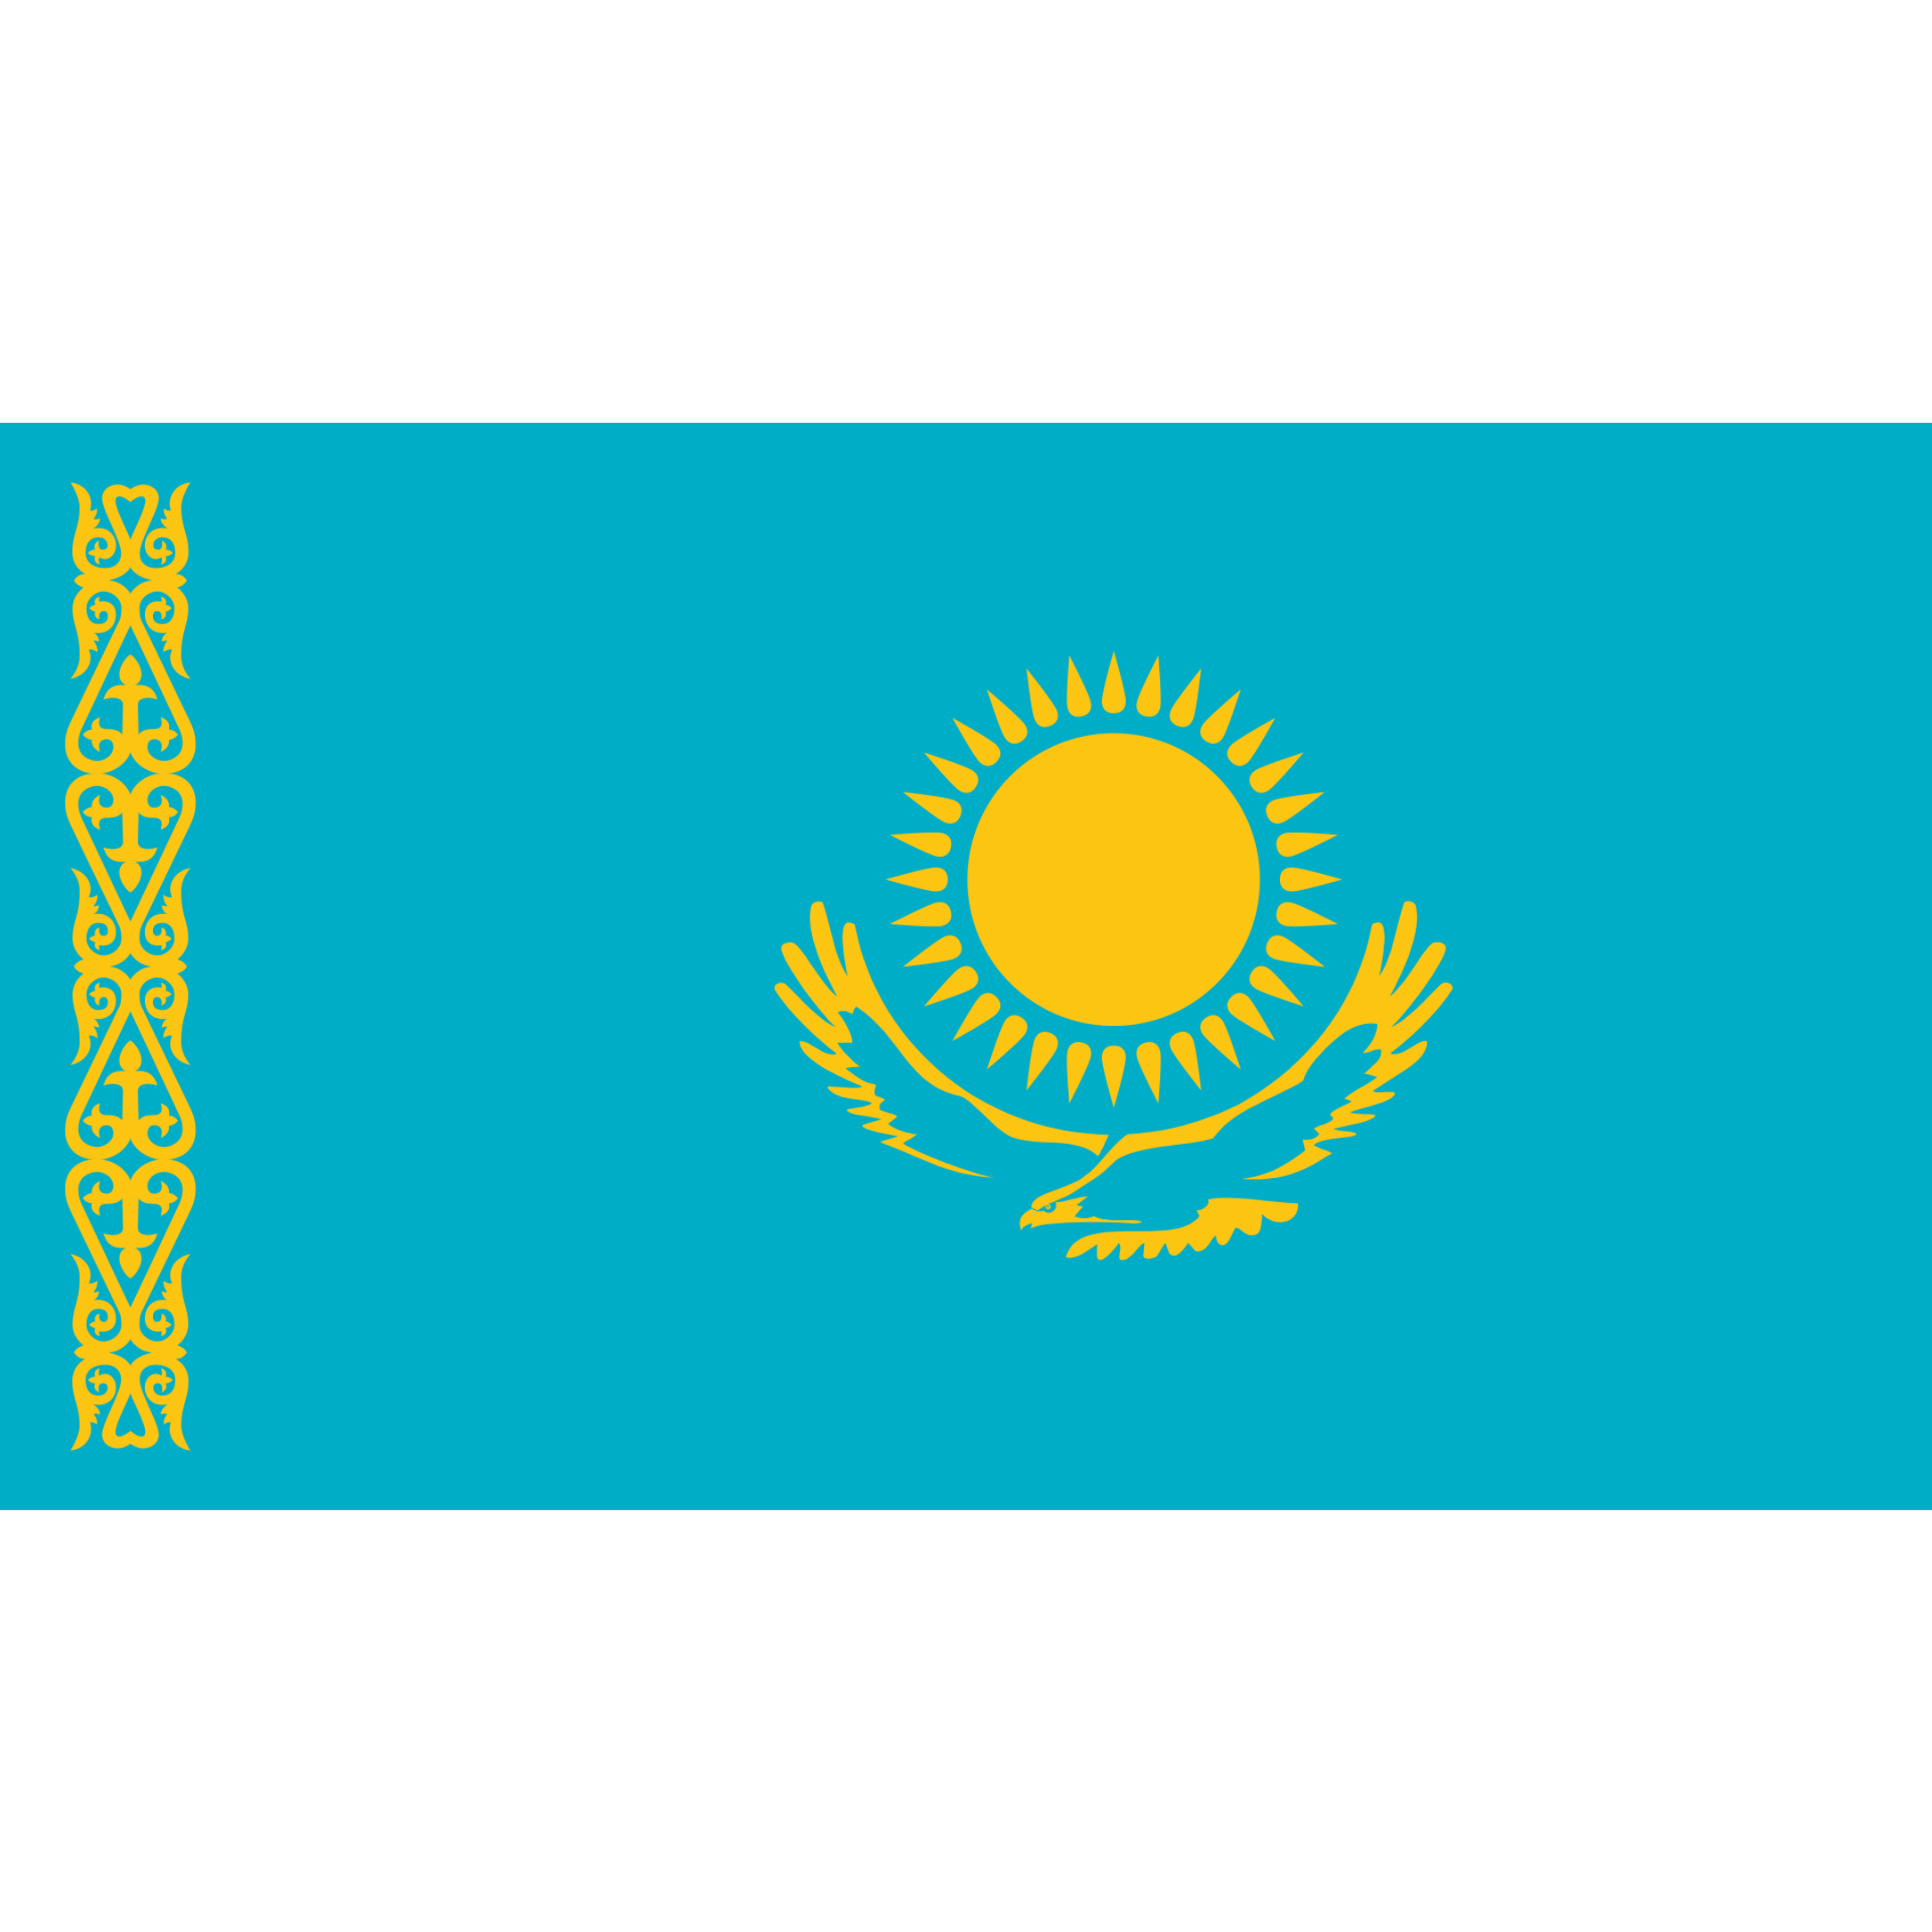 Kazakhstan's flag is a blue rectangle with a yellow sun and eagle in the centre, and a vertical band on the right.